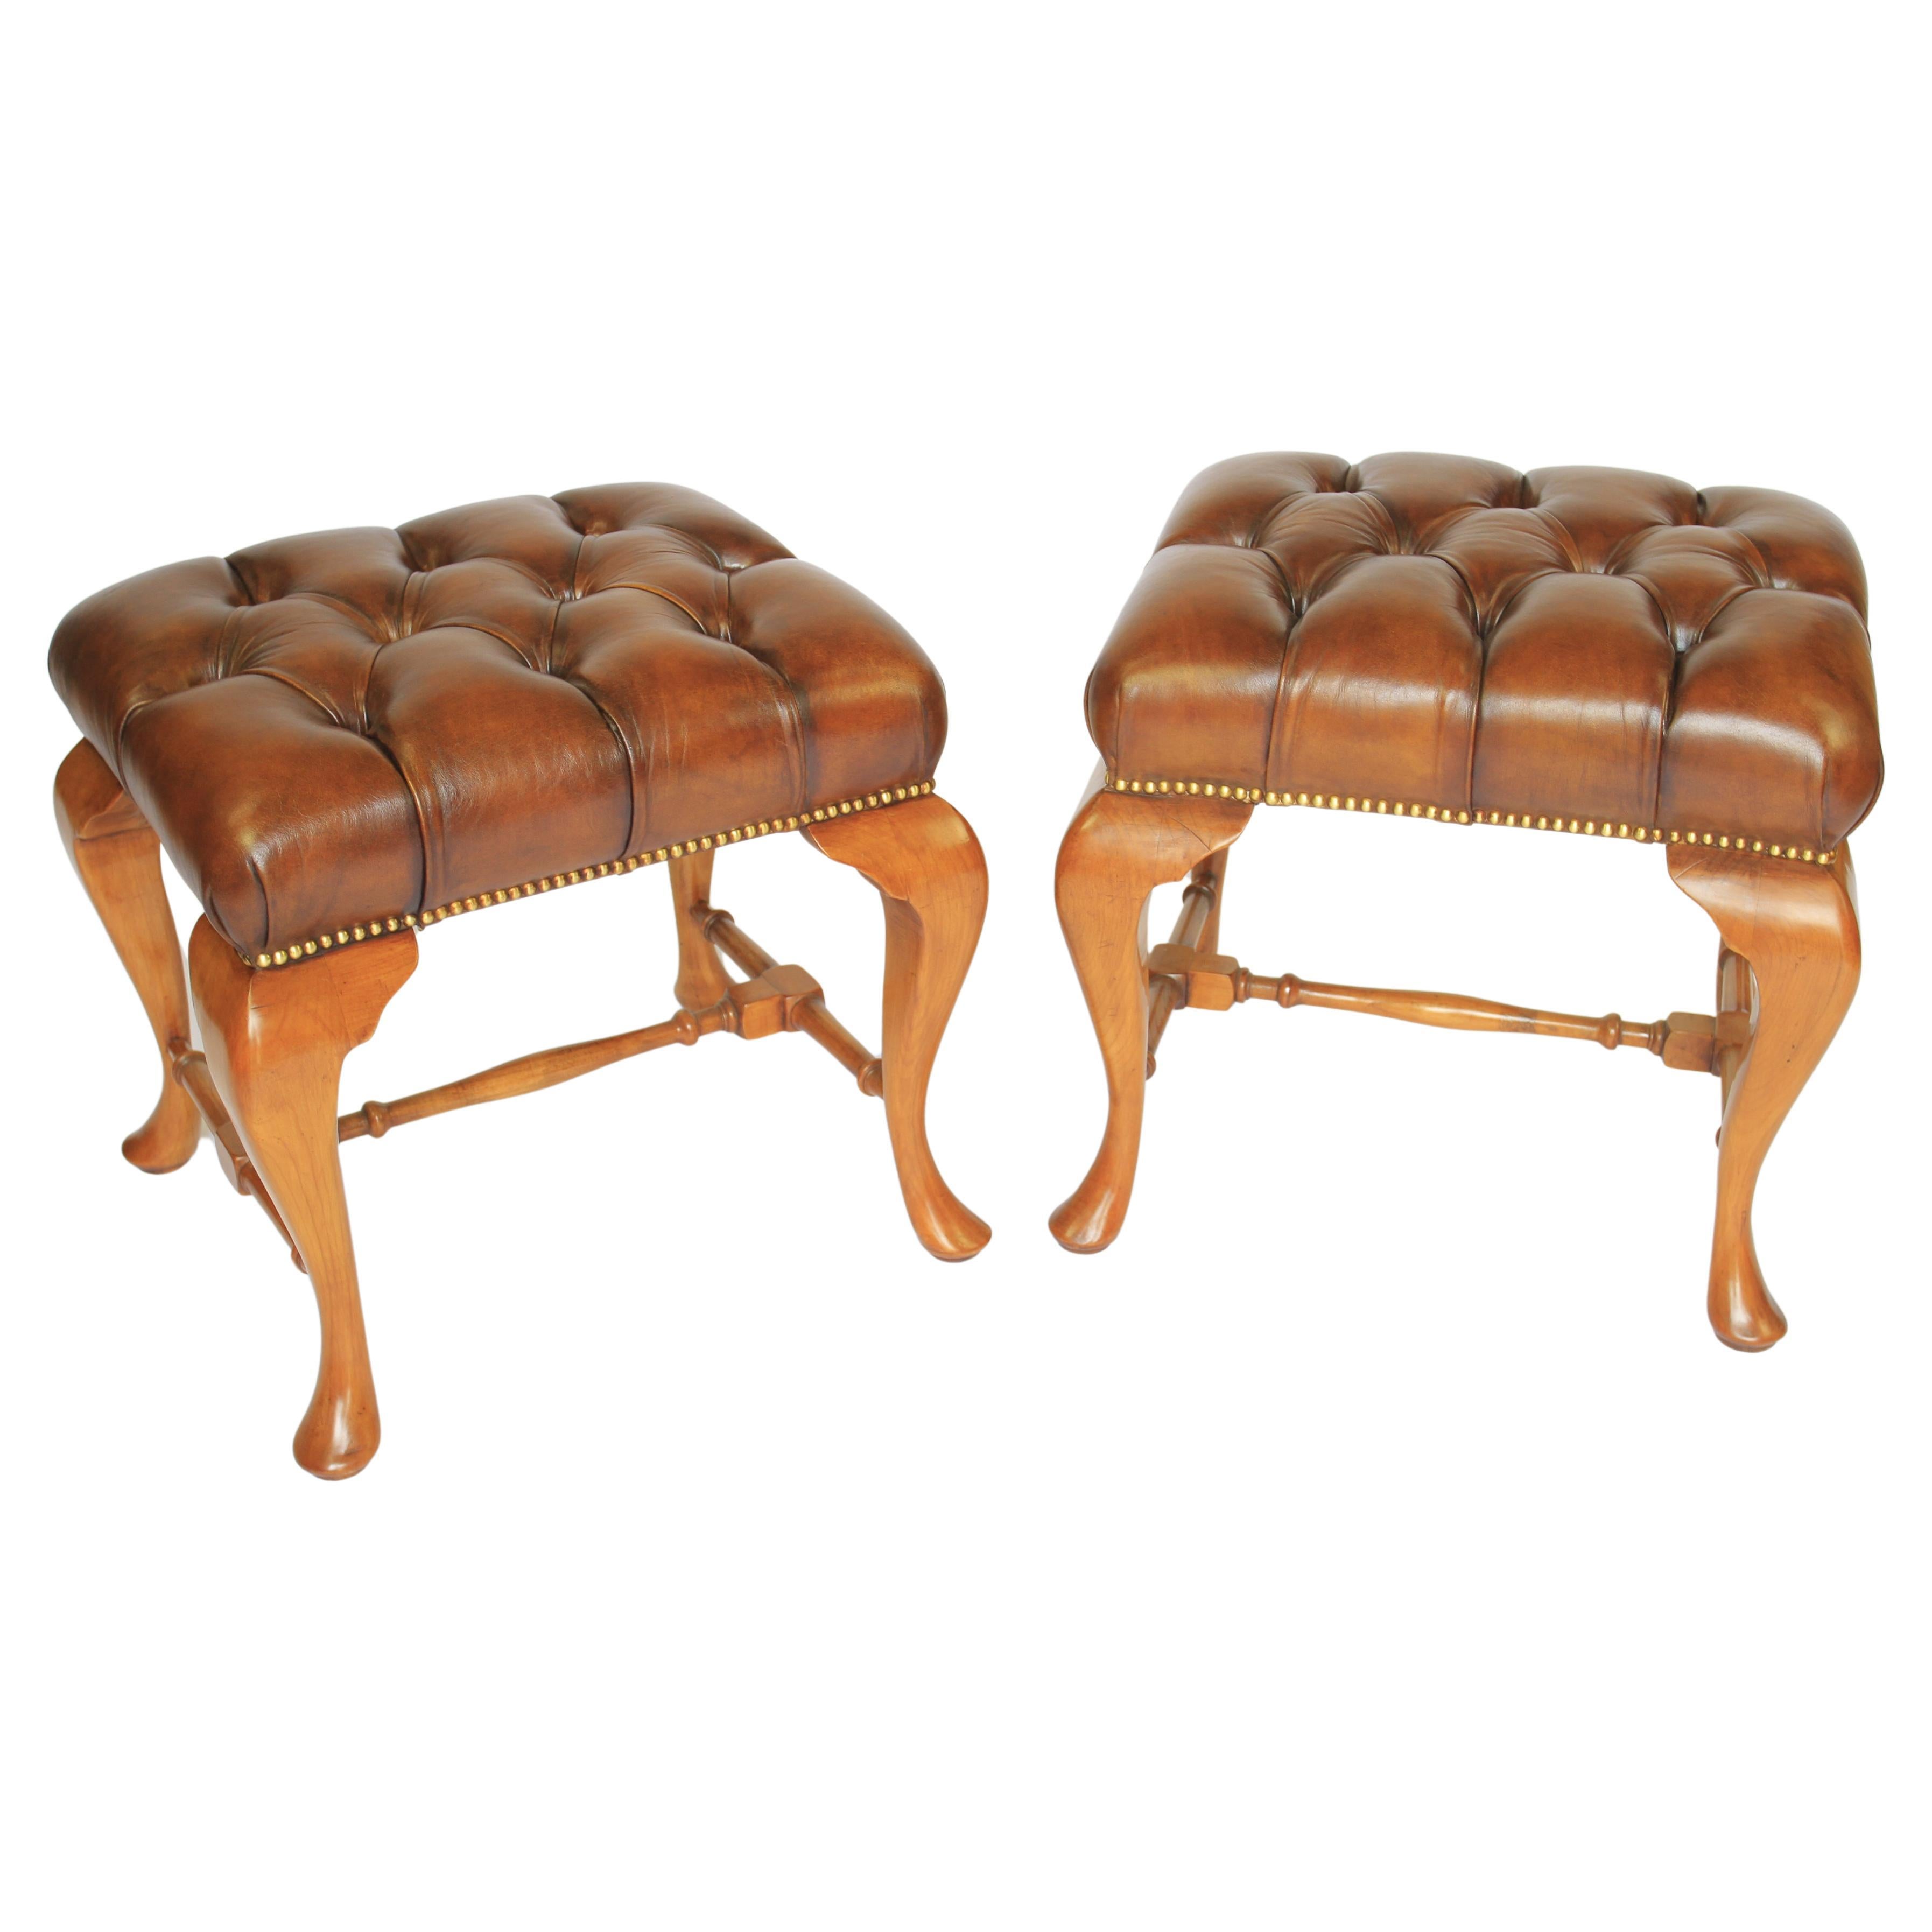 Pair Queen Anne Revival Walnut Foot Stools circa 1920s For Sale